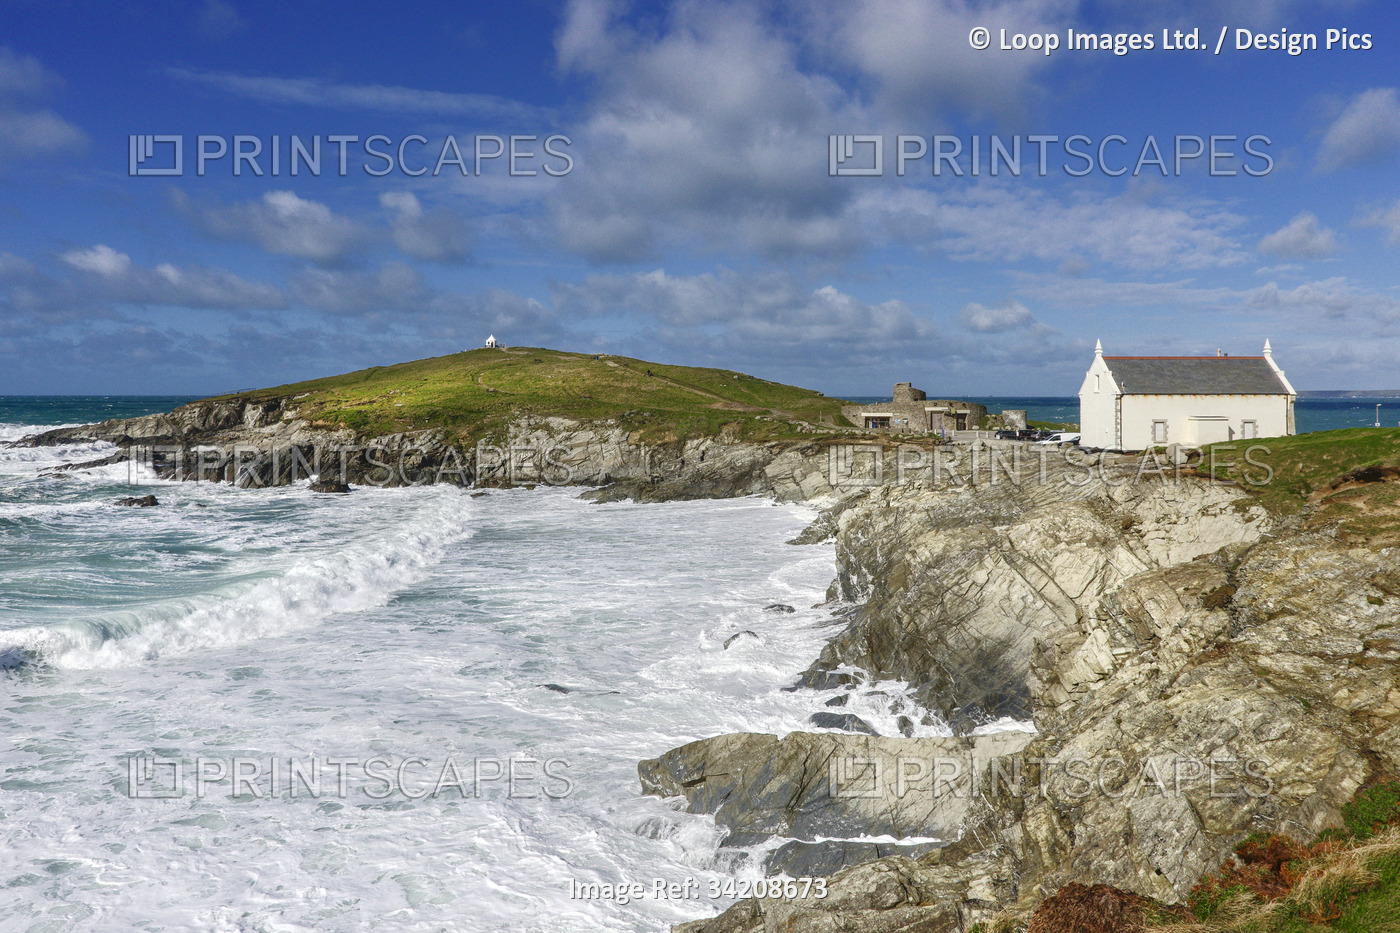 The rugged coastline at Little Fistral and Towan Head in Newquay in Cornwall.